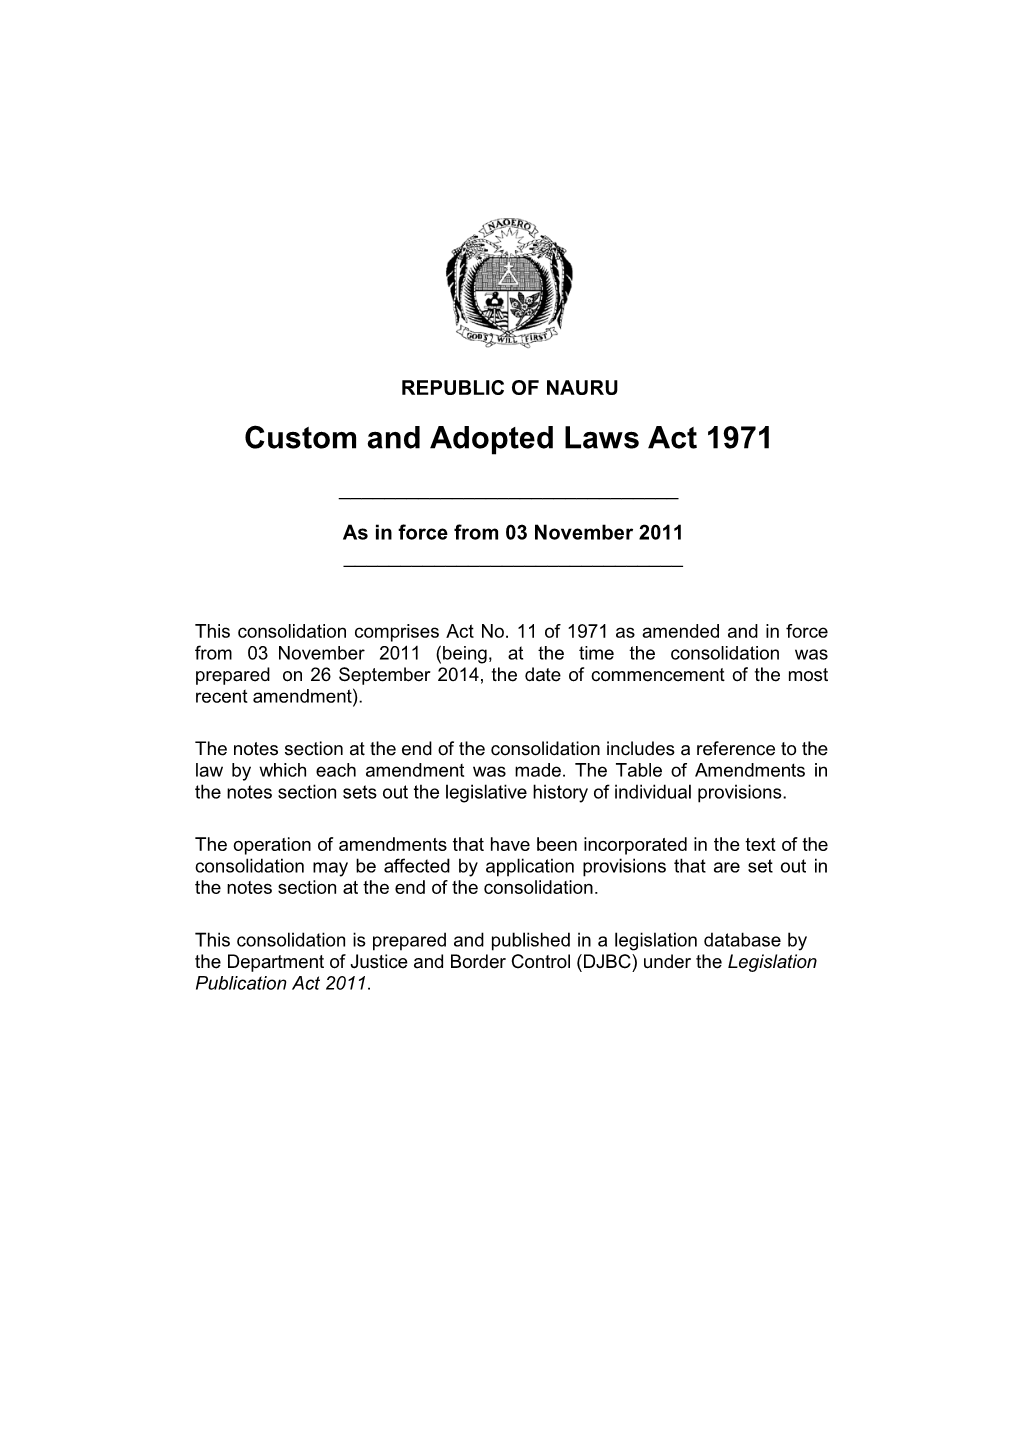 Custom and Adopted Laws Act 1971